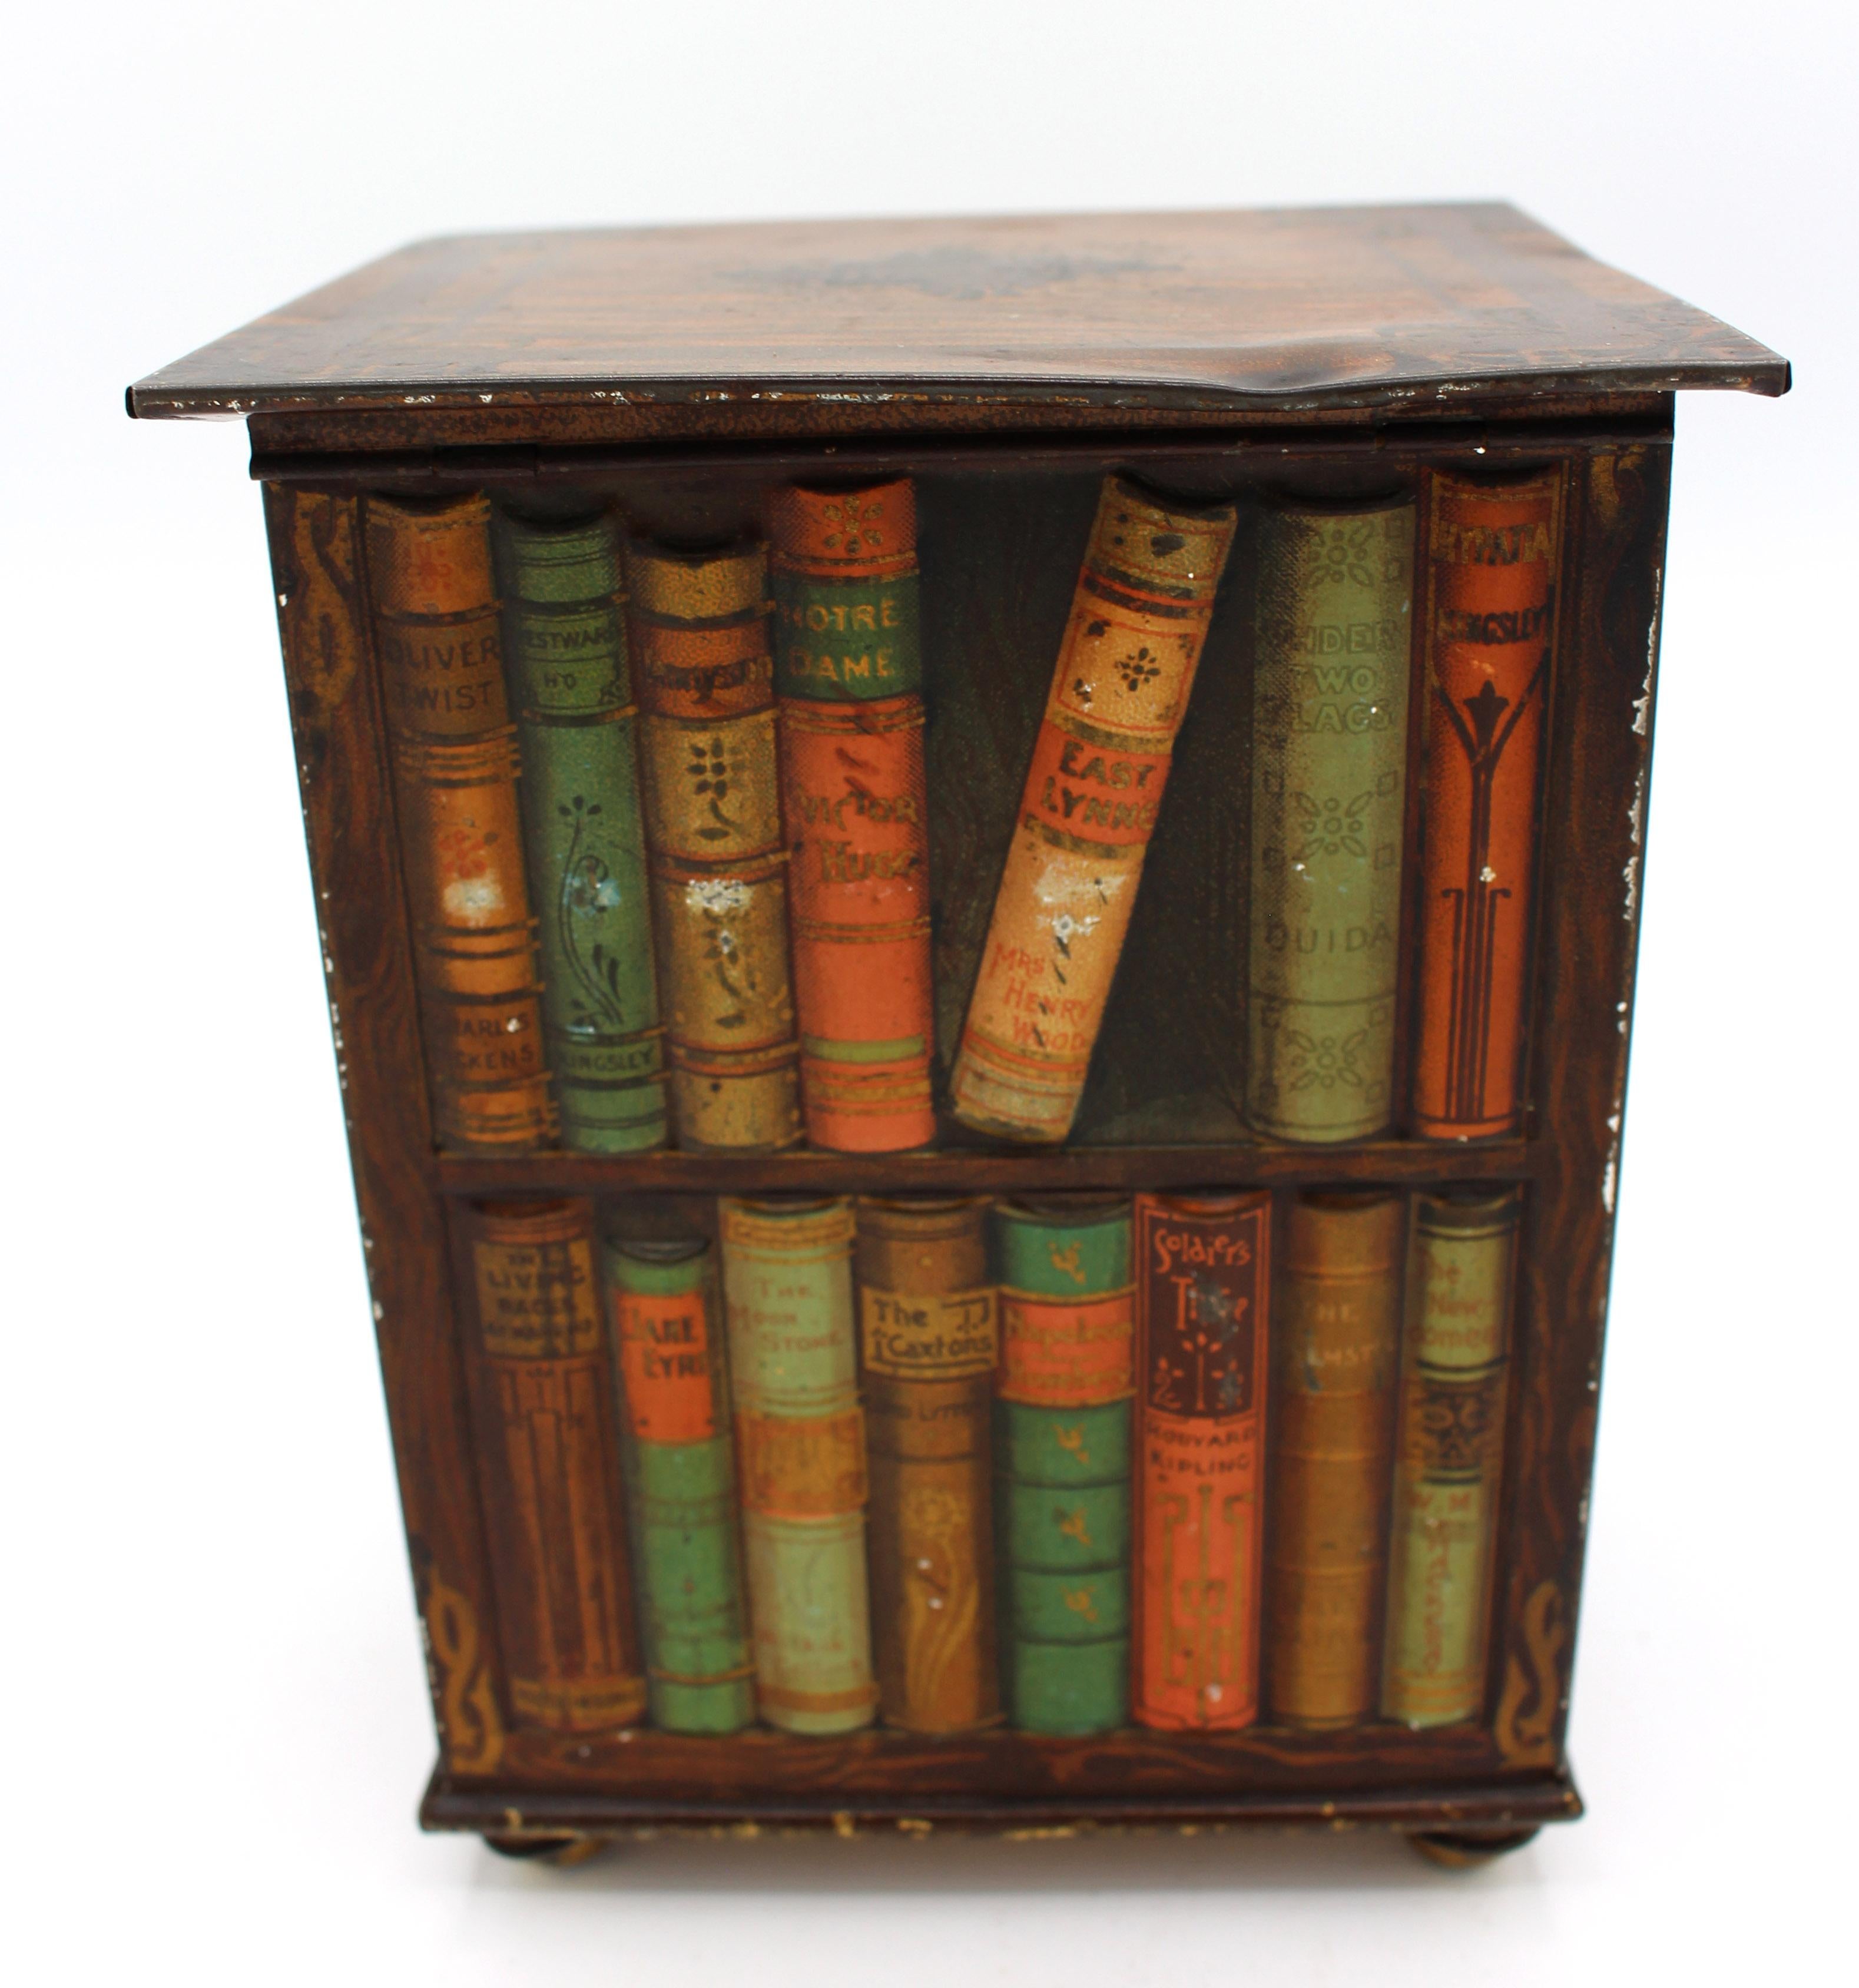 Faux Revolving Bookcase Biscuit Tin Box by Huntley & Palmers, 1905, English In Good Condition For Sale In Chapel Hill, NC